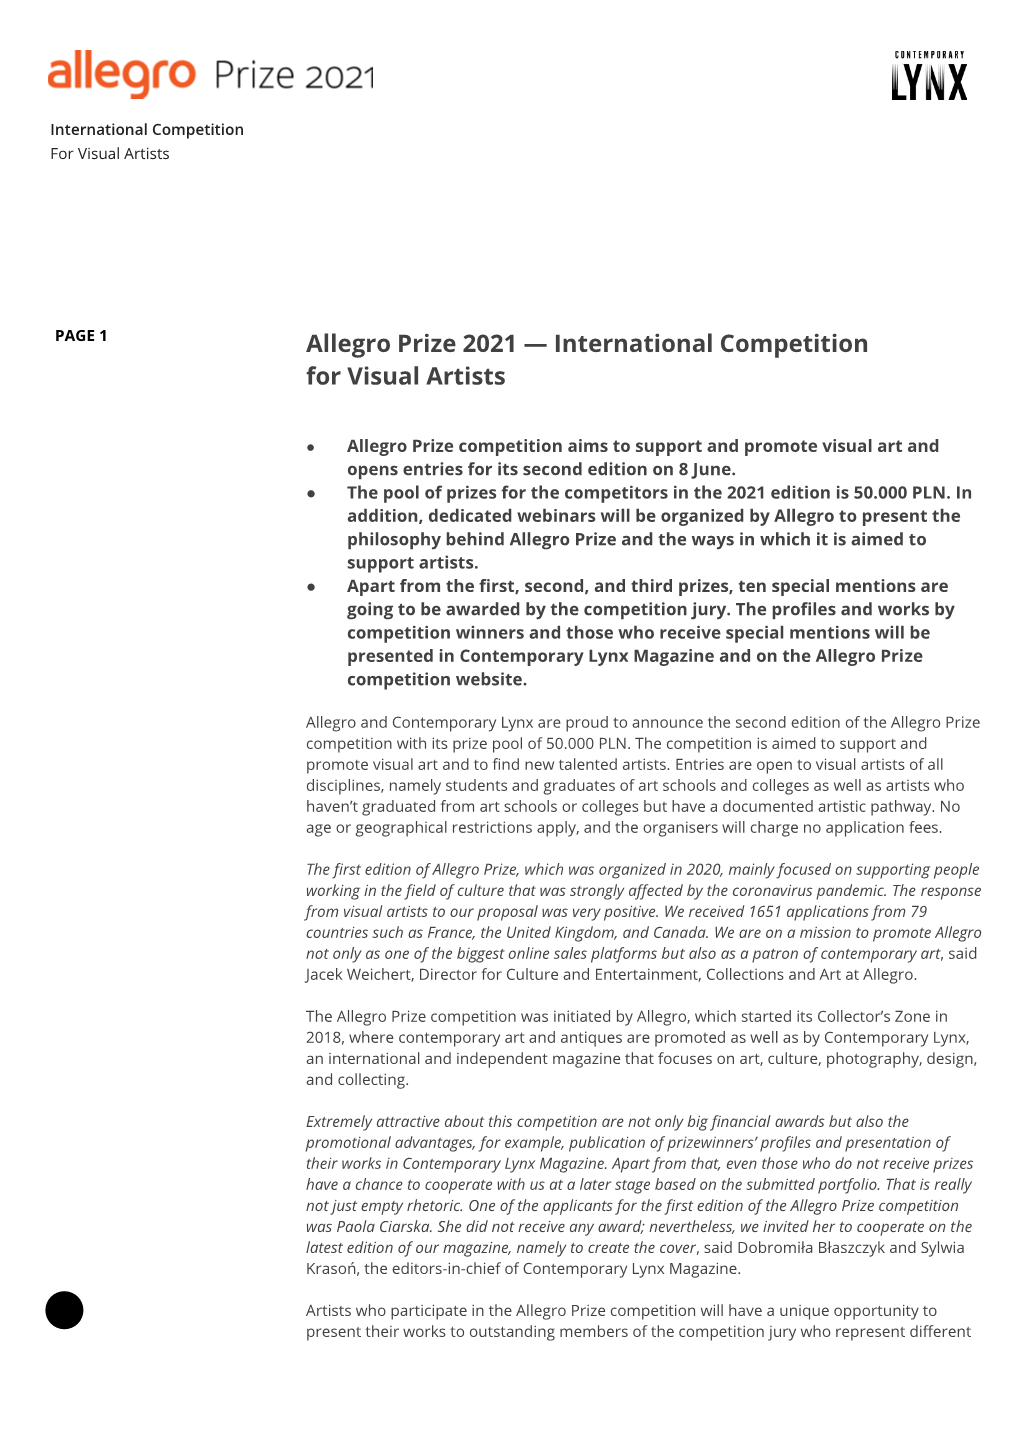 Allegro Prize 2021 — International Competition for Visual Artists